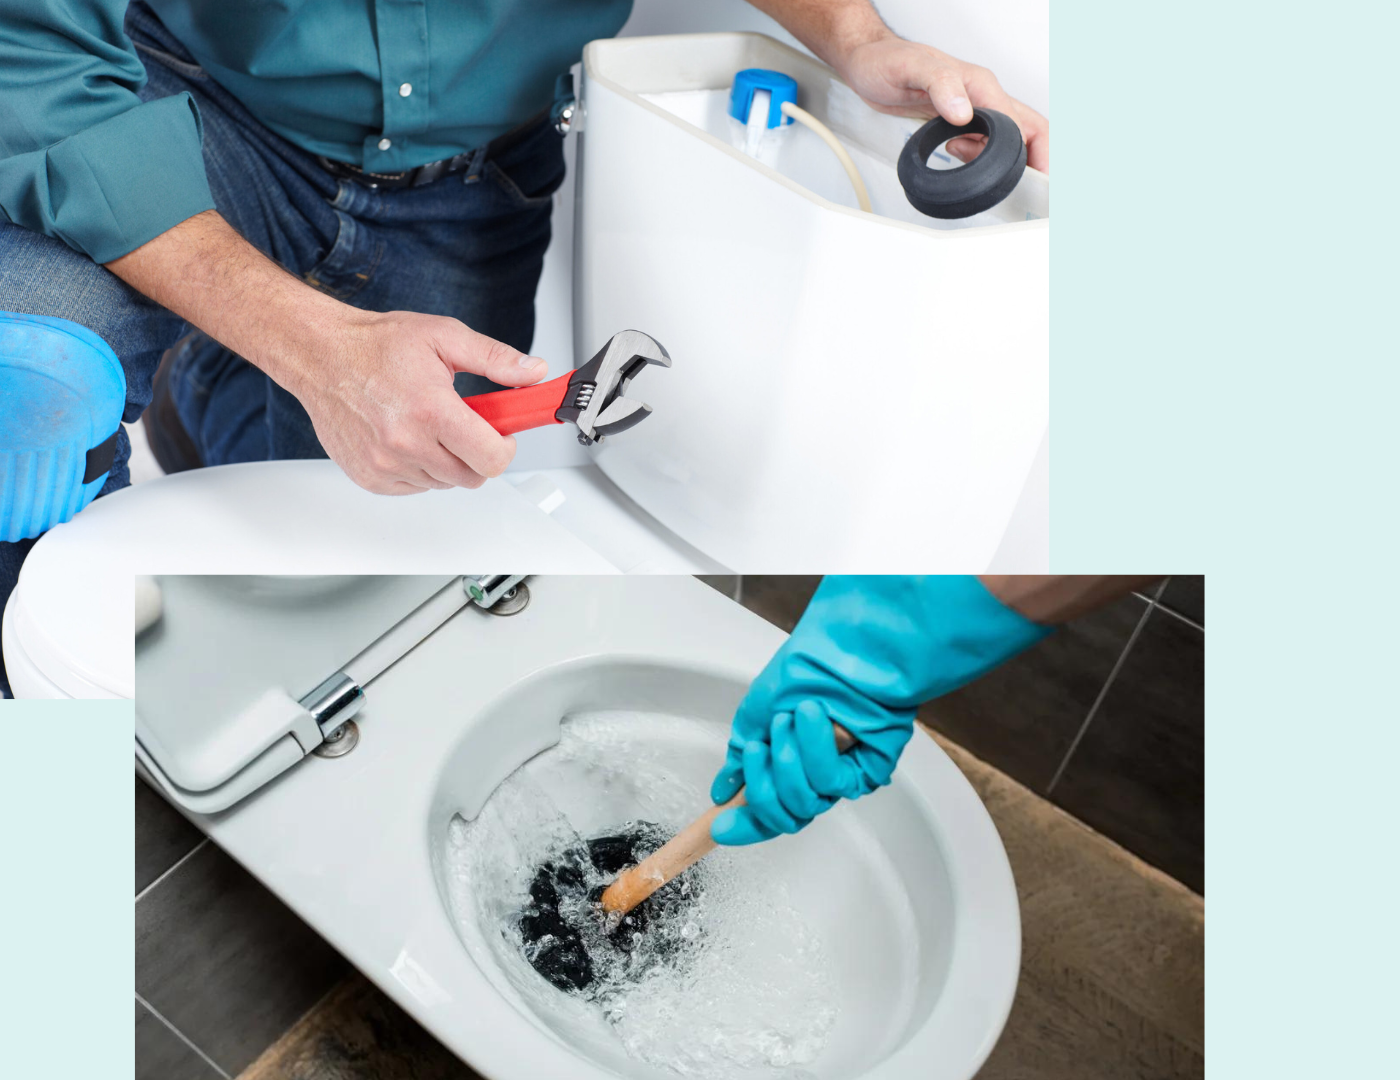  call us to repair your toilet problem today. Our plumbers are near you and ready  